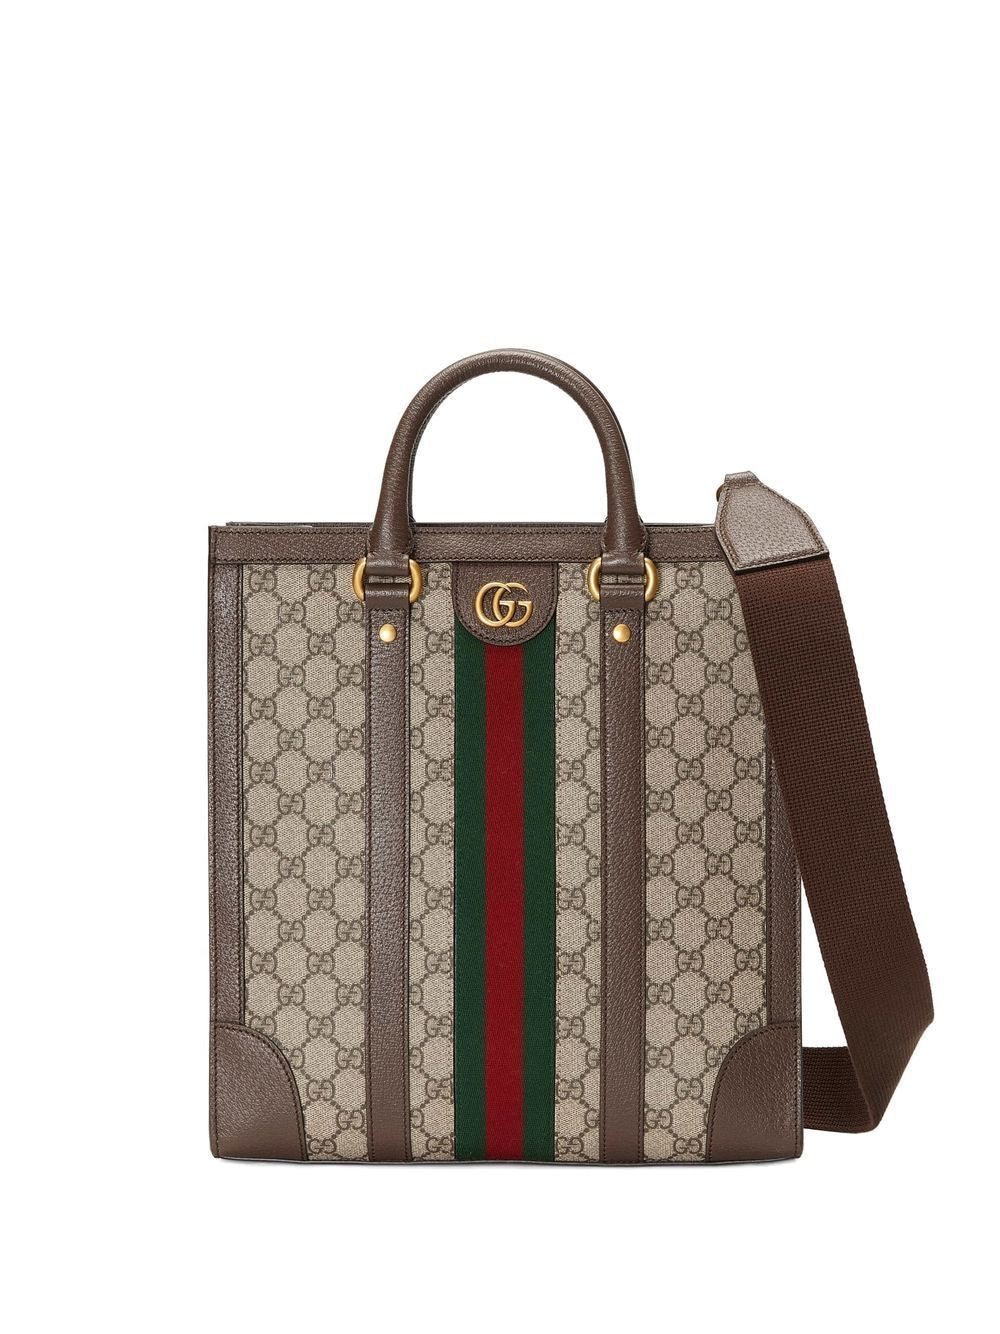 GUCCI Tan GG Supreme Canvas Medium Ophidia Tote with Green and Red Web Detail, Leather Accents and Antique Gold Hardware, 32x30x10.5 cm